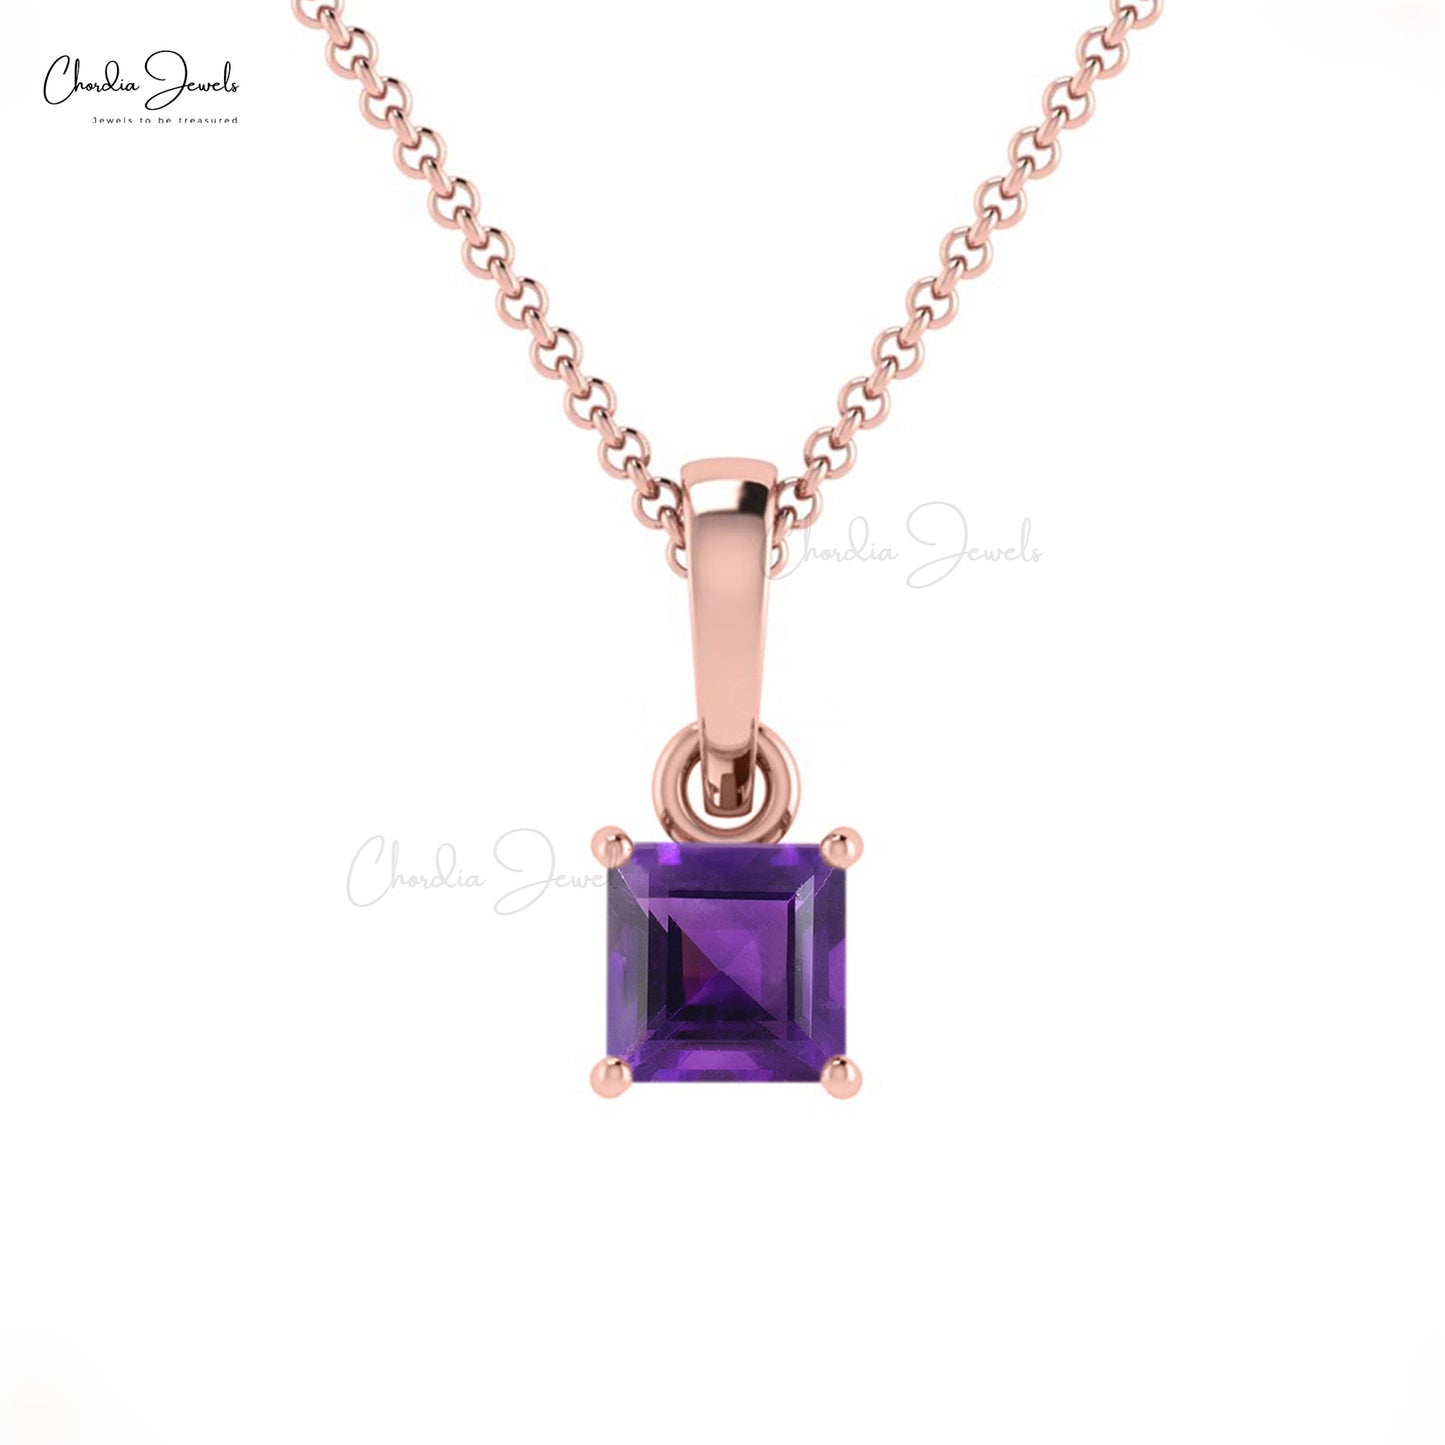 Load image into Gallery viewer, New Unique Design Natural Purple Amethyst Pendant Necklace Square Shape February Birthstone Gemstone Pendant 14k Real Gold Jewelry For Gift
